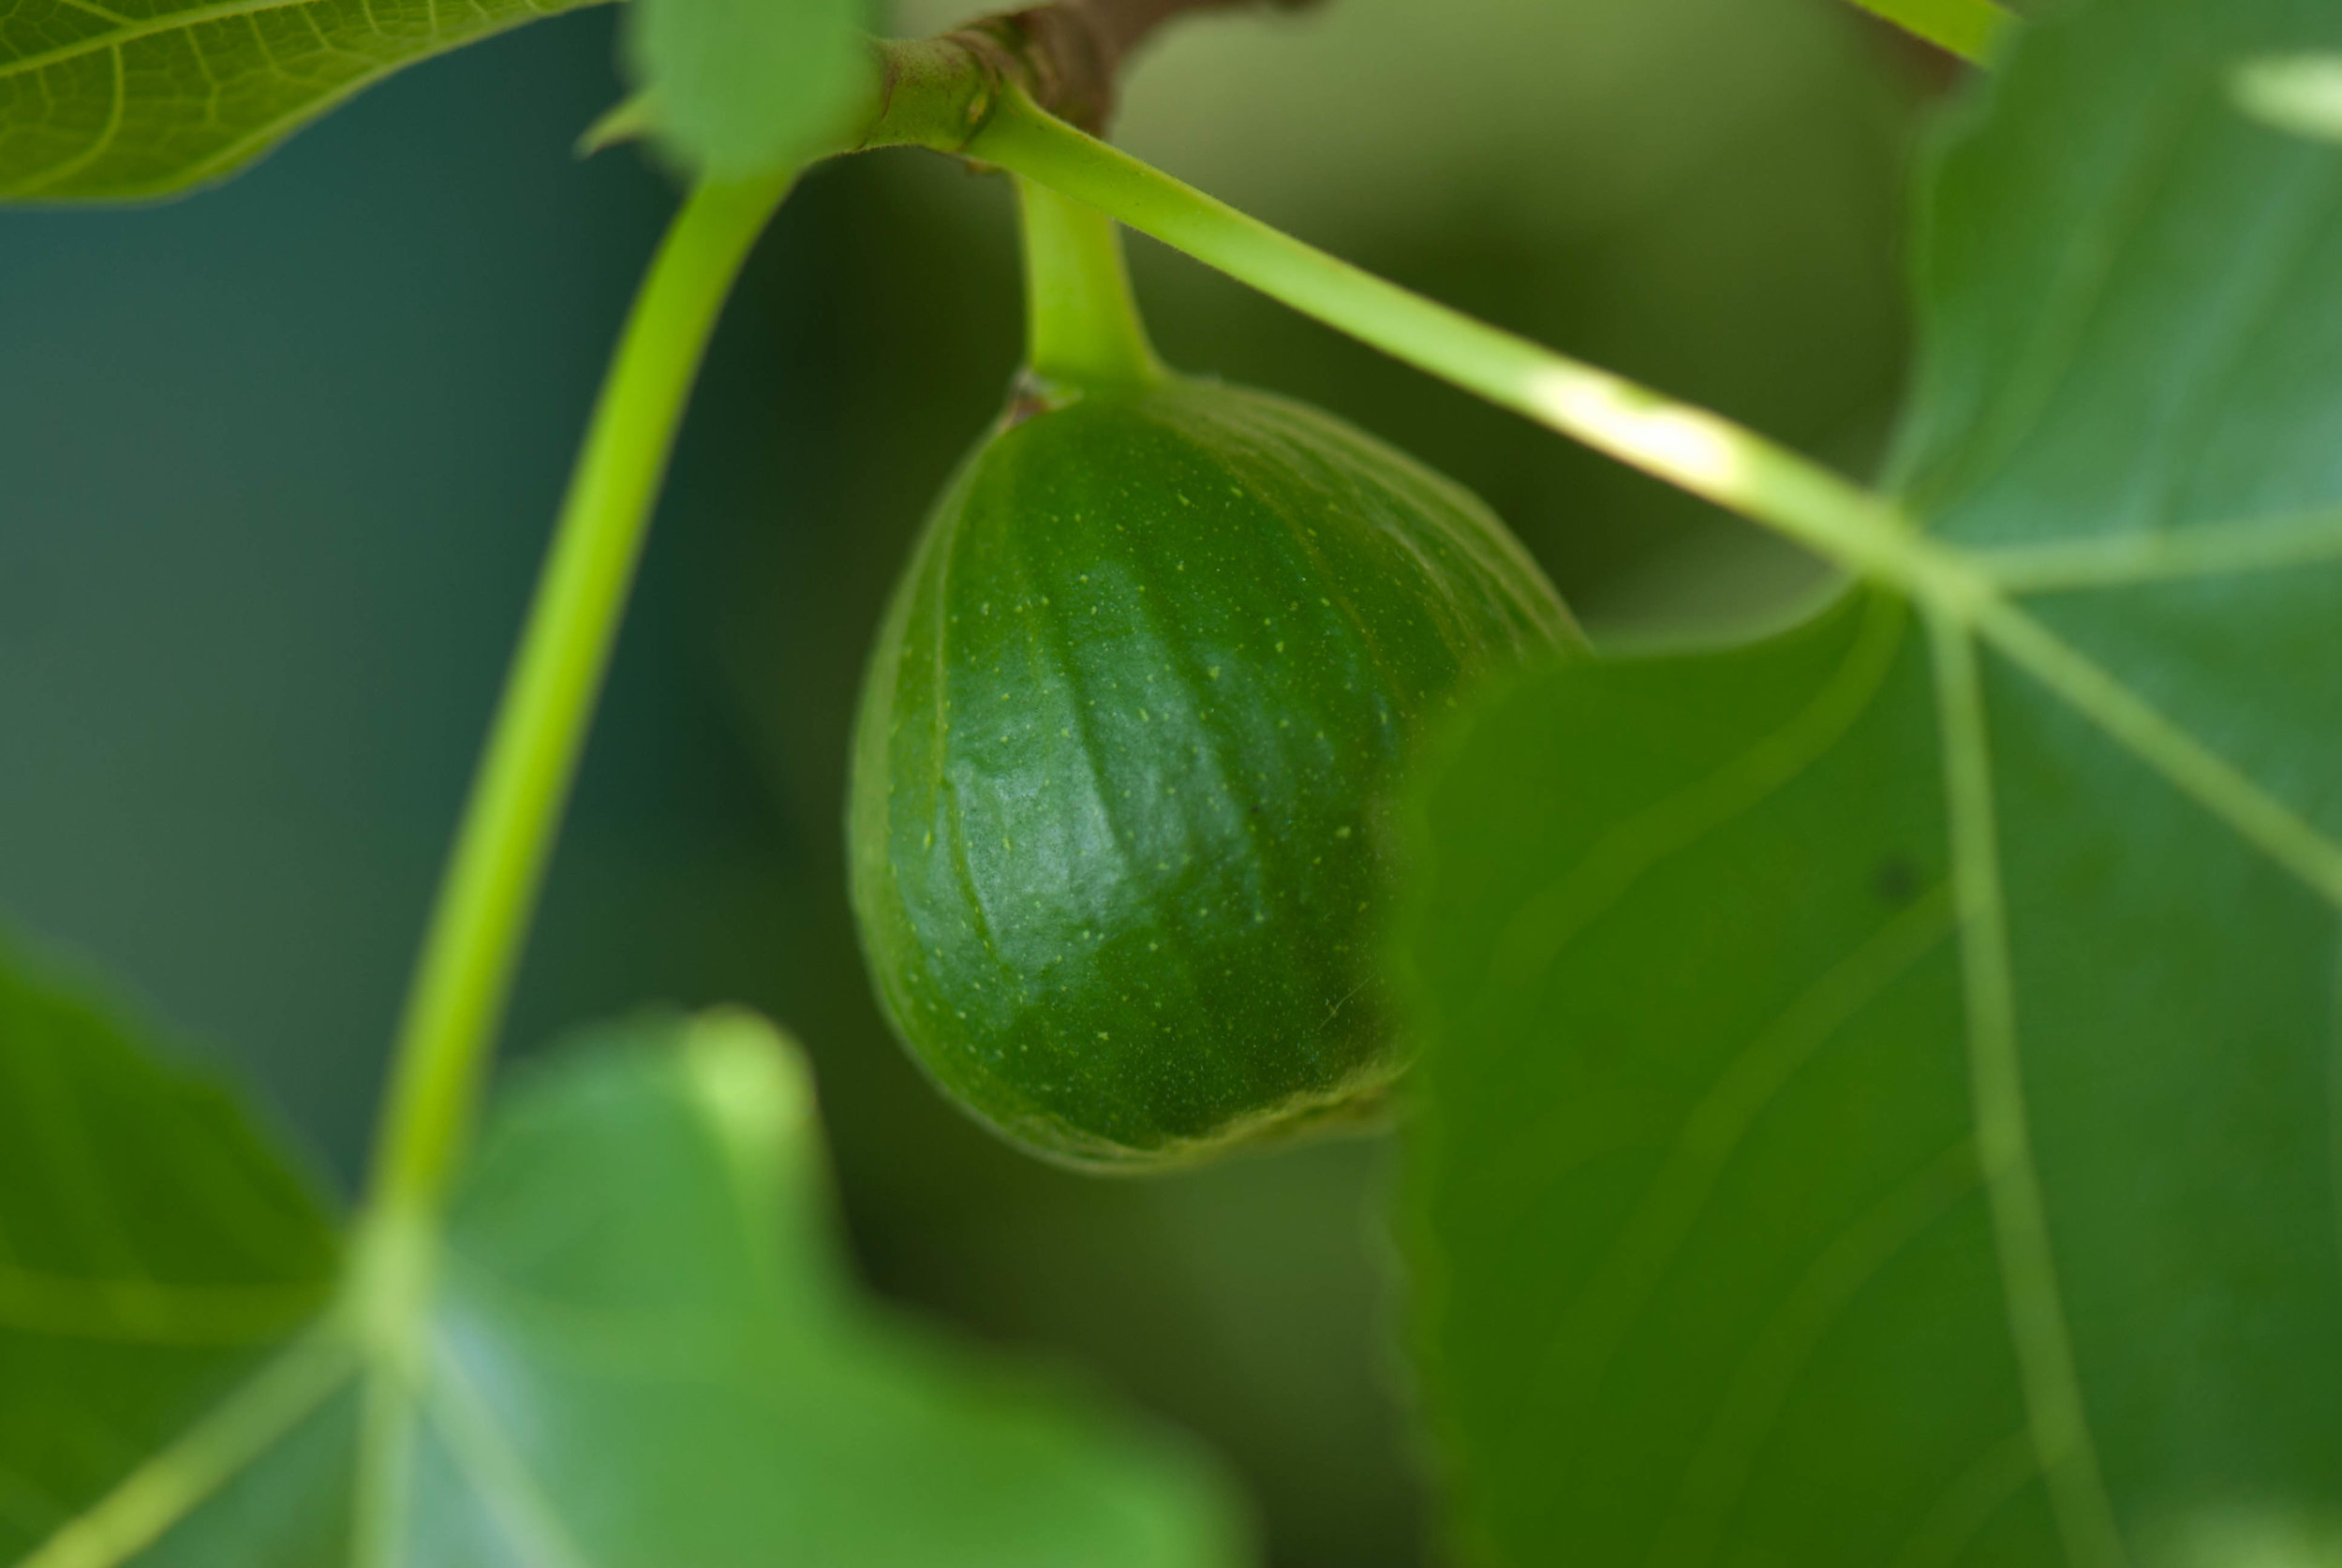 Are You Stuck with a Tree Full of Unripe Figs? — The Italian Garden Project